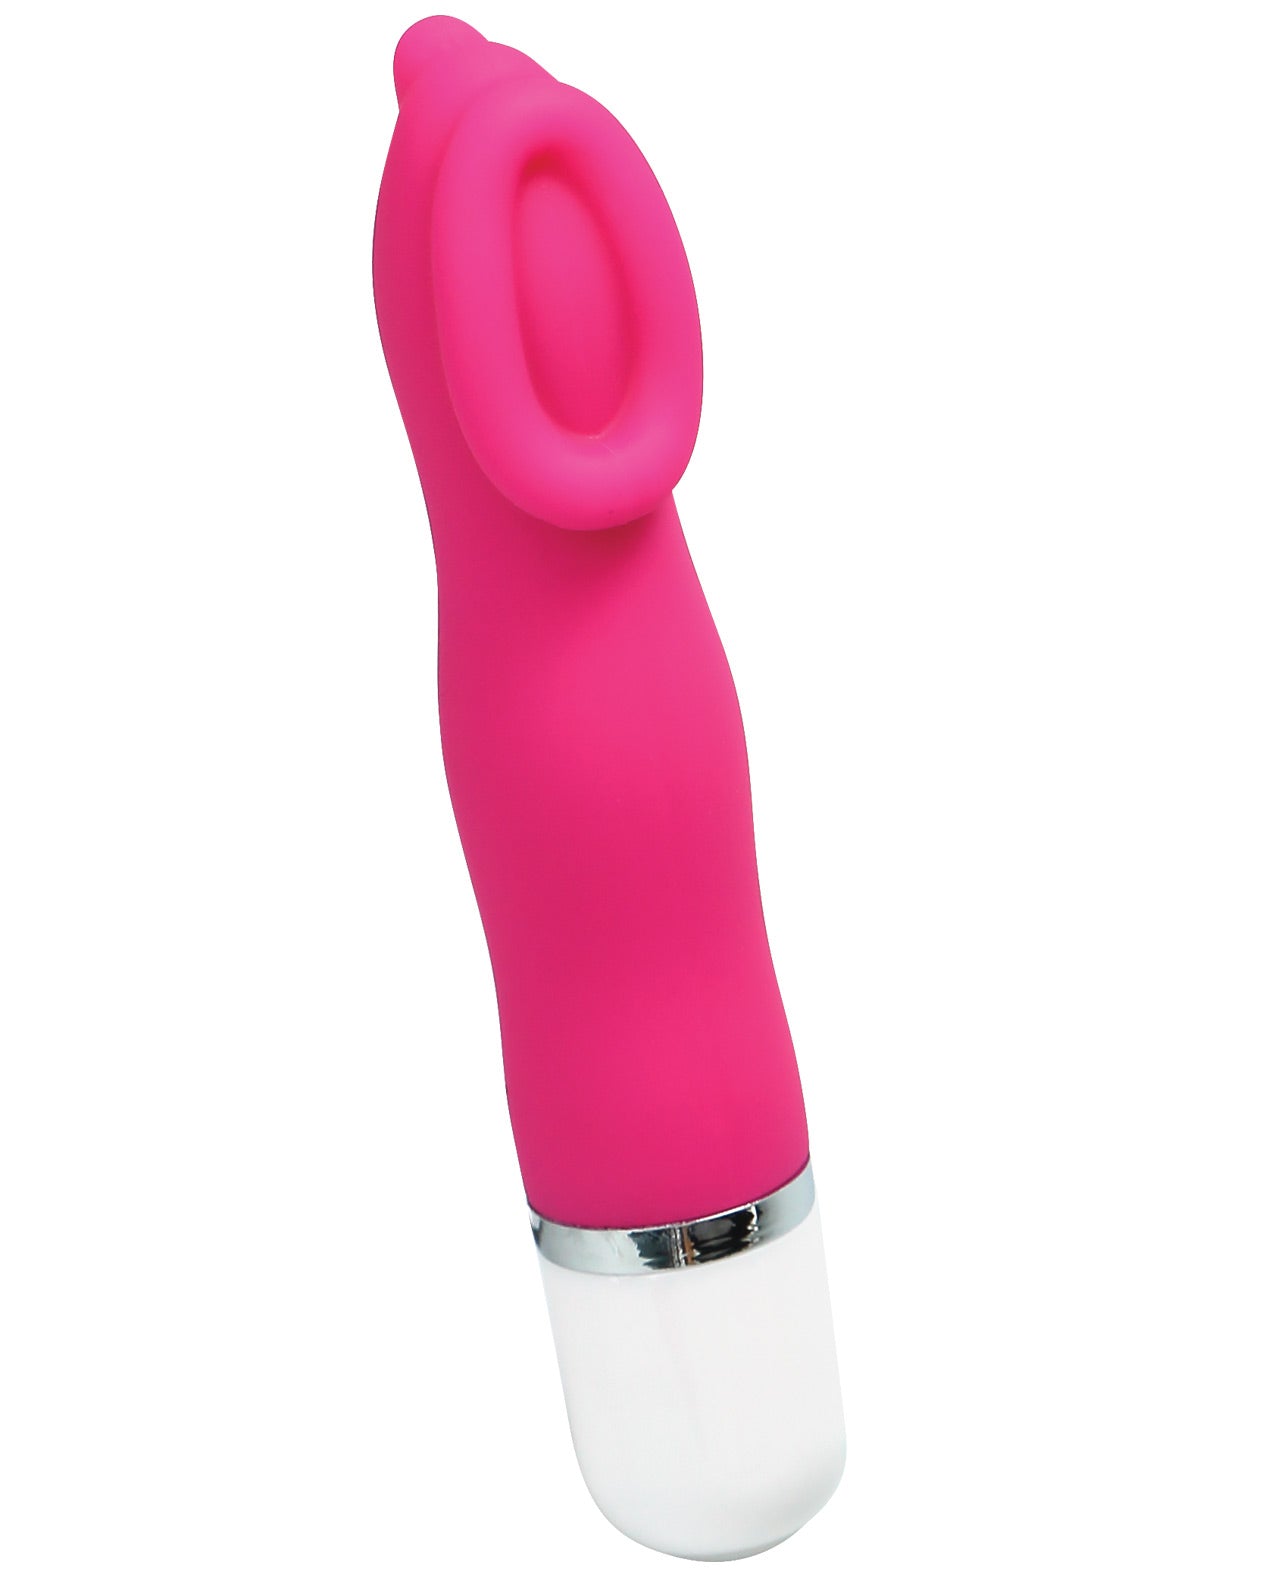 Vedo Luv Mini Vibe - Hot In Bed Pink - LUST Depot